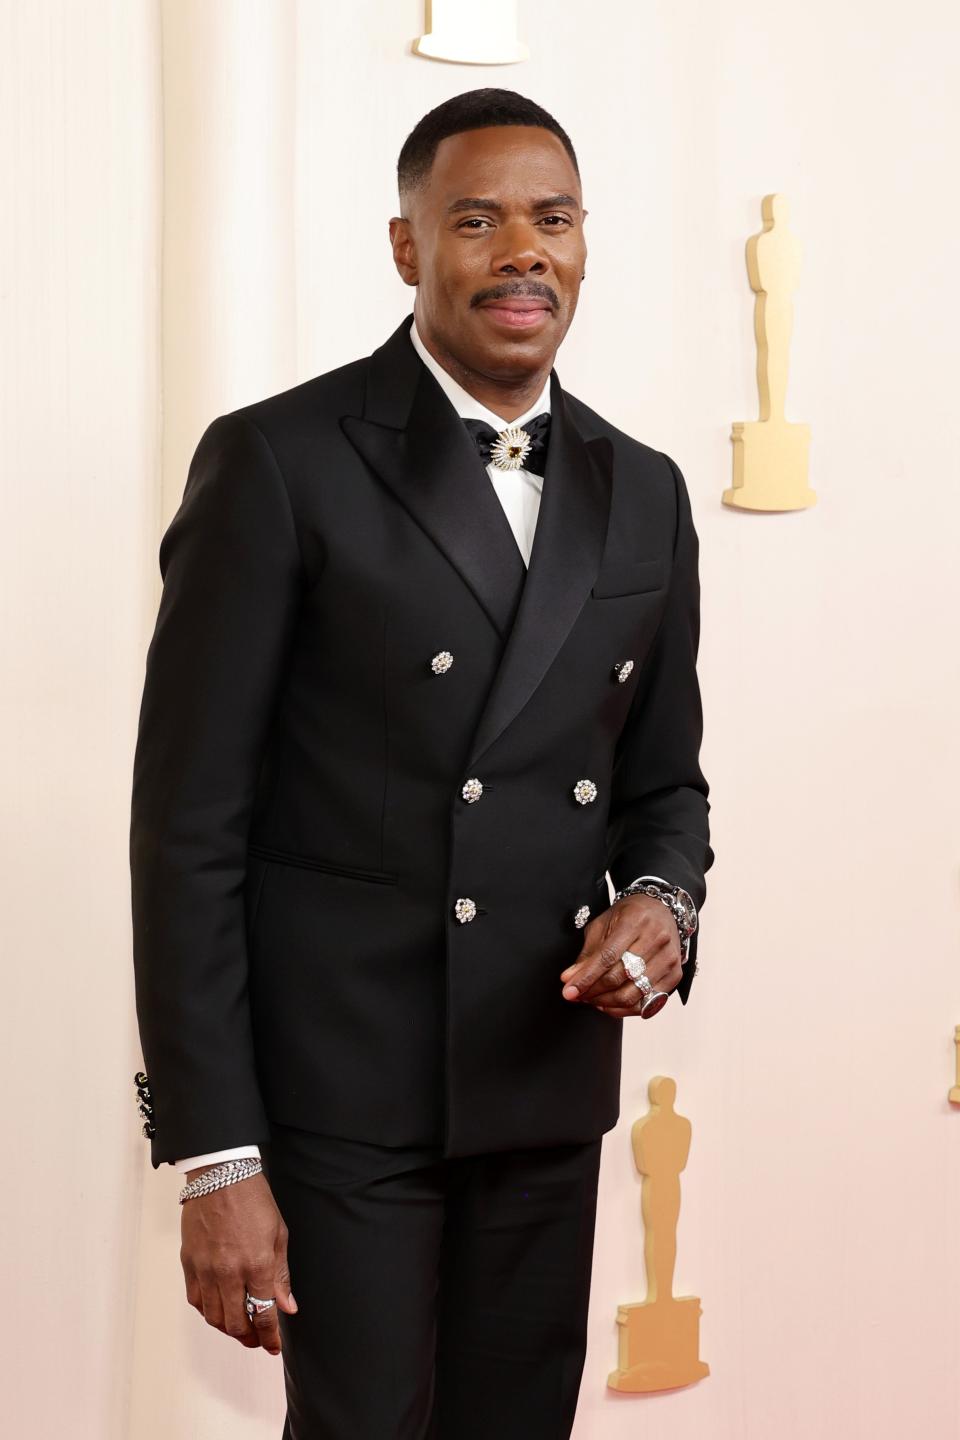 Image may contain: Colman Domingo, Blazer, Clothing, Coat, Jacket, Formal Wear, Suit, Adult, Person, Standing, and Tuxedo